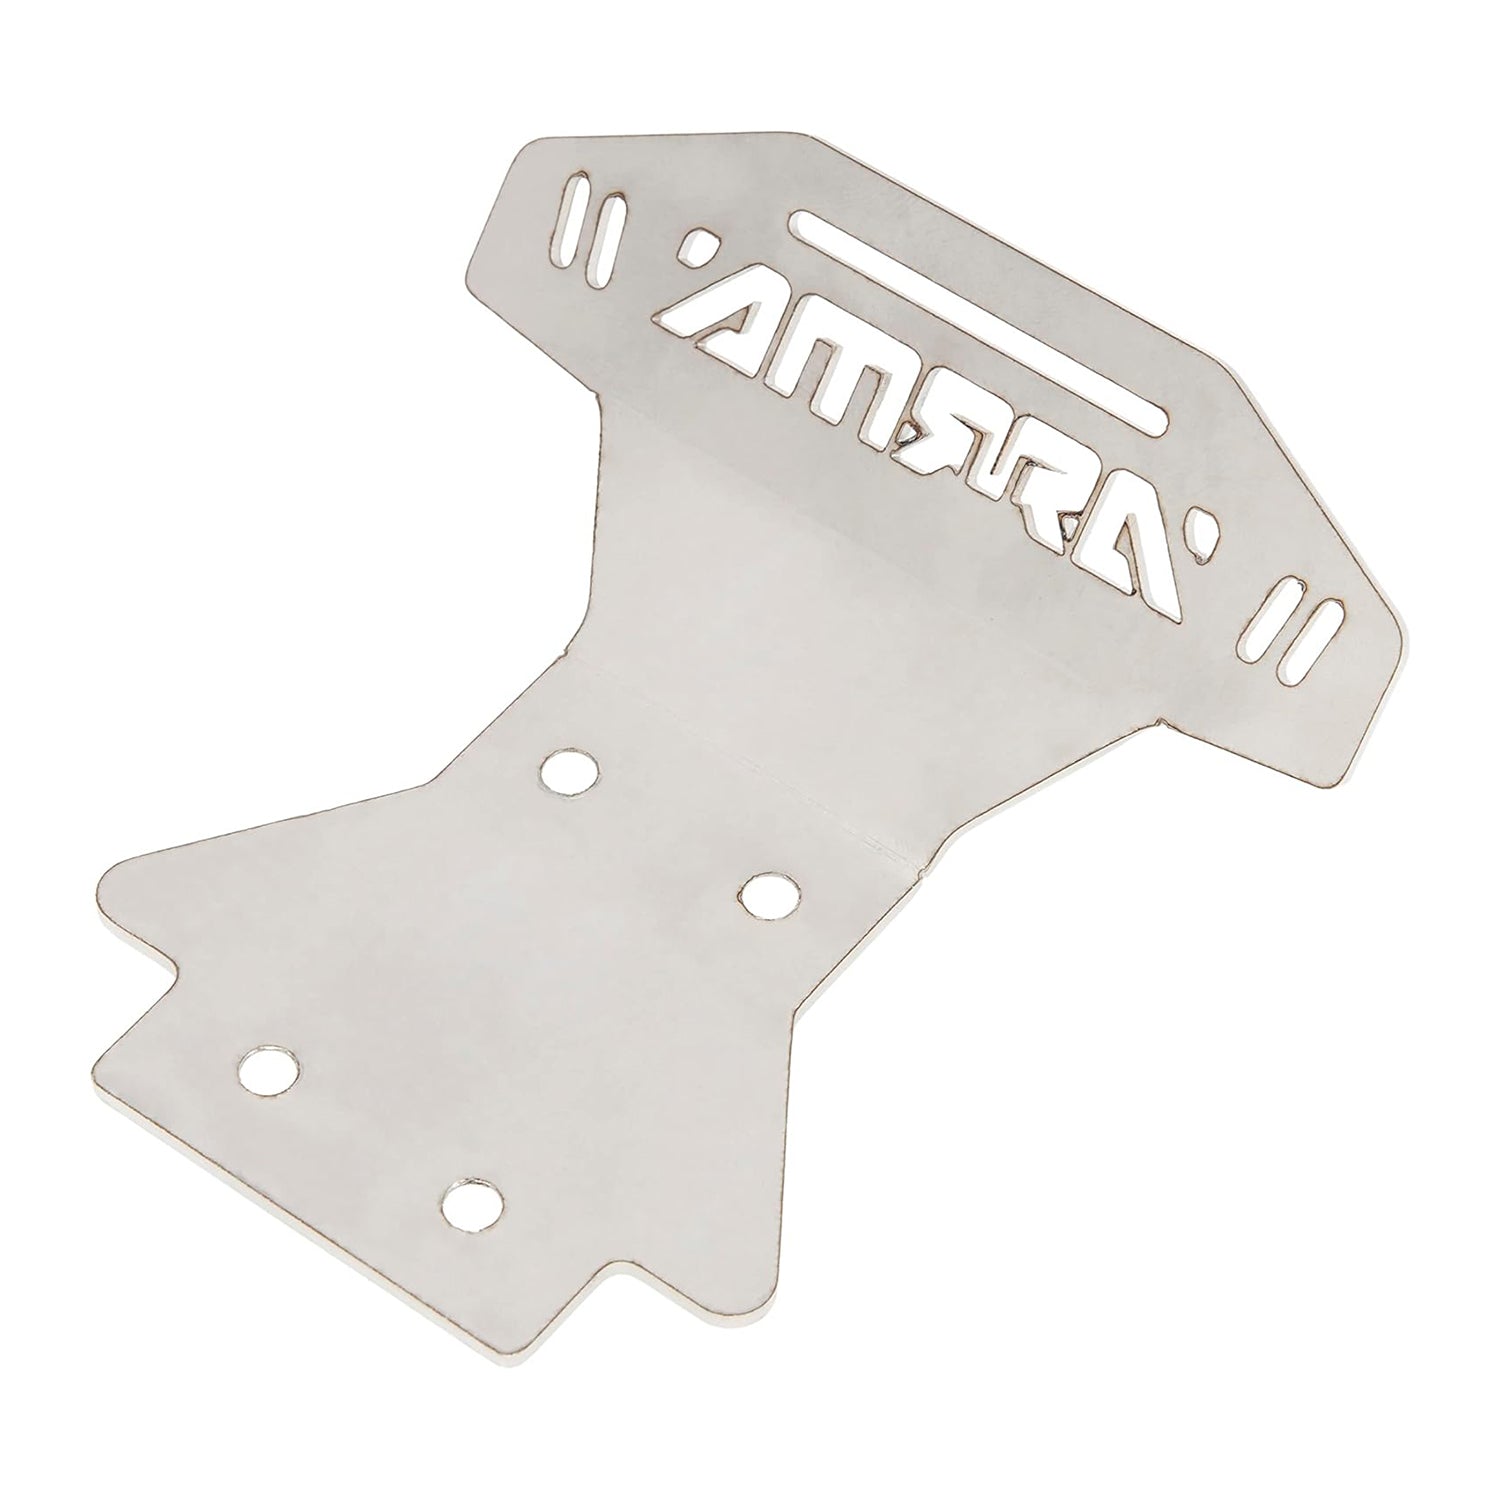 Stainless Steel Chassis Armor Kit for ARRMA Kraton